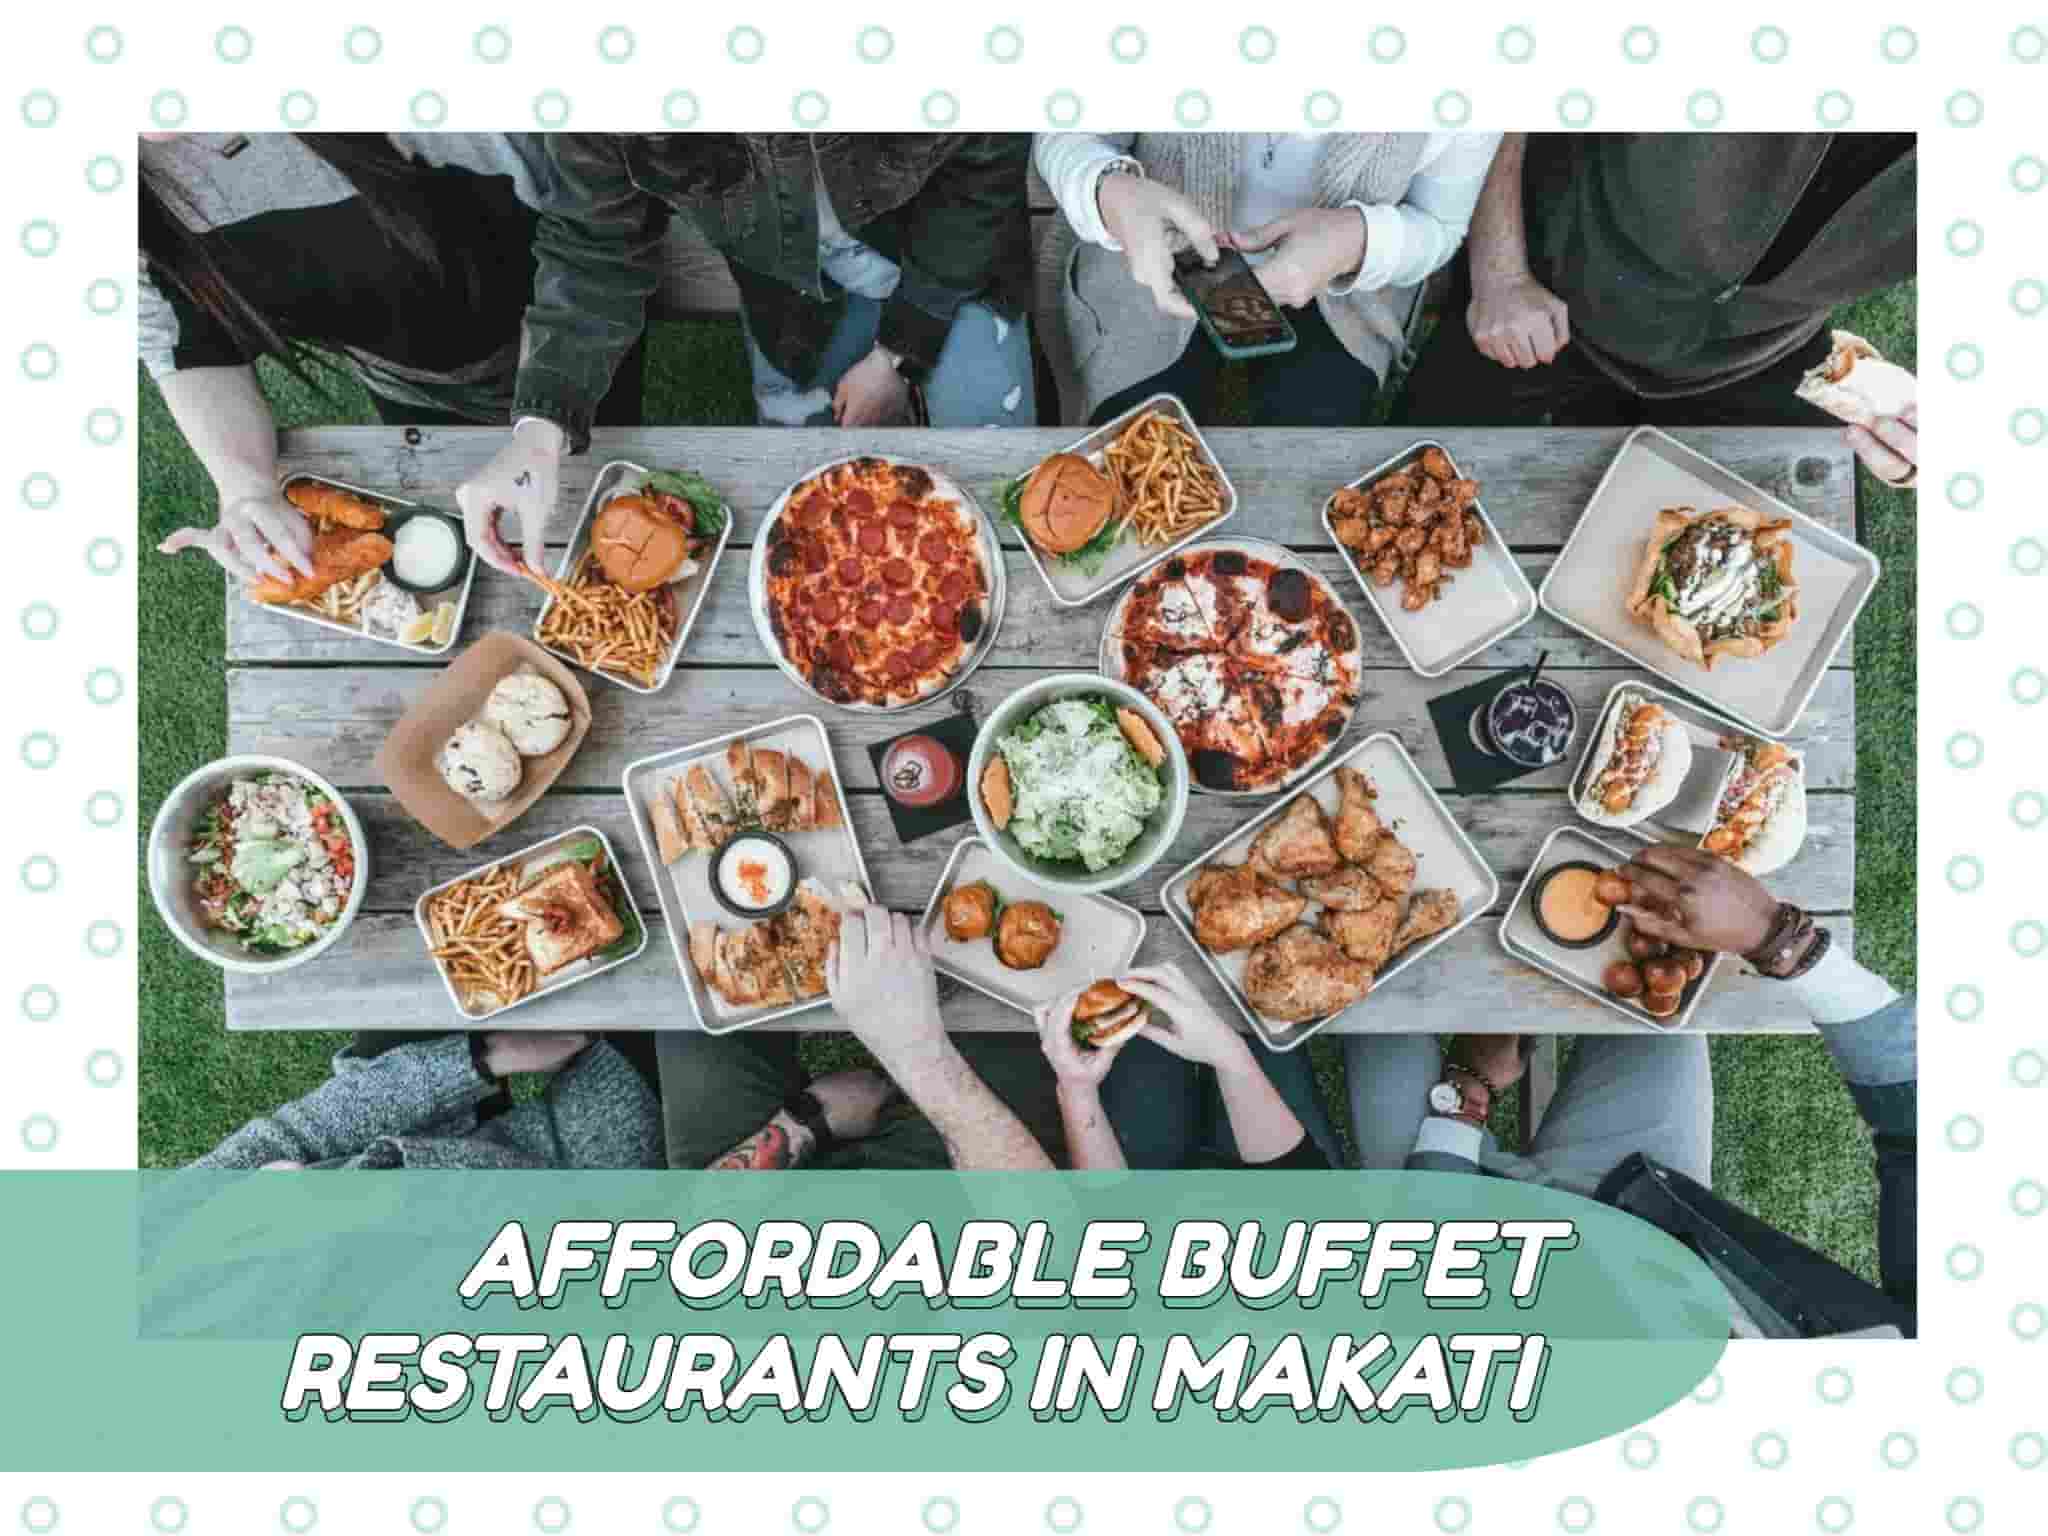 Affordable Buffet Restaurants in Makati Philippines